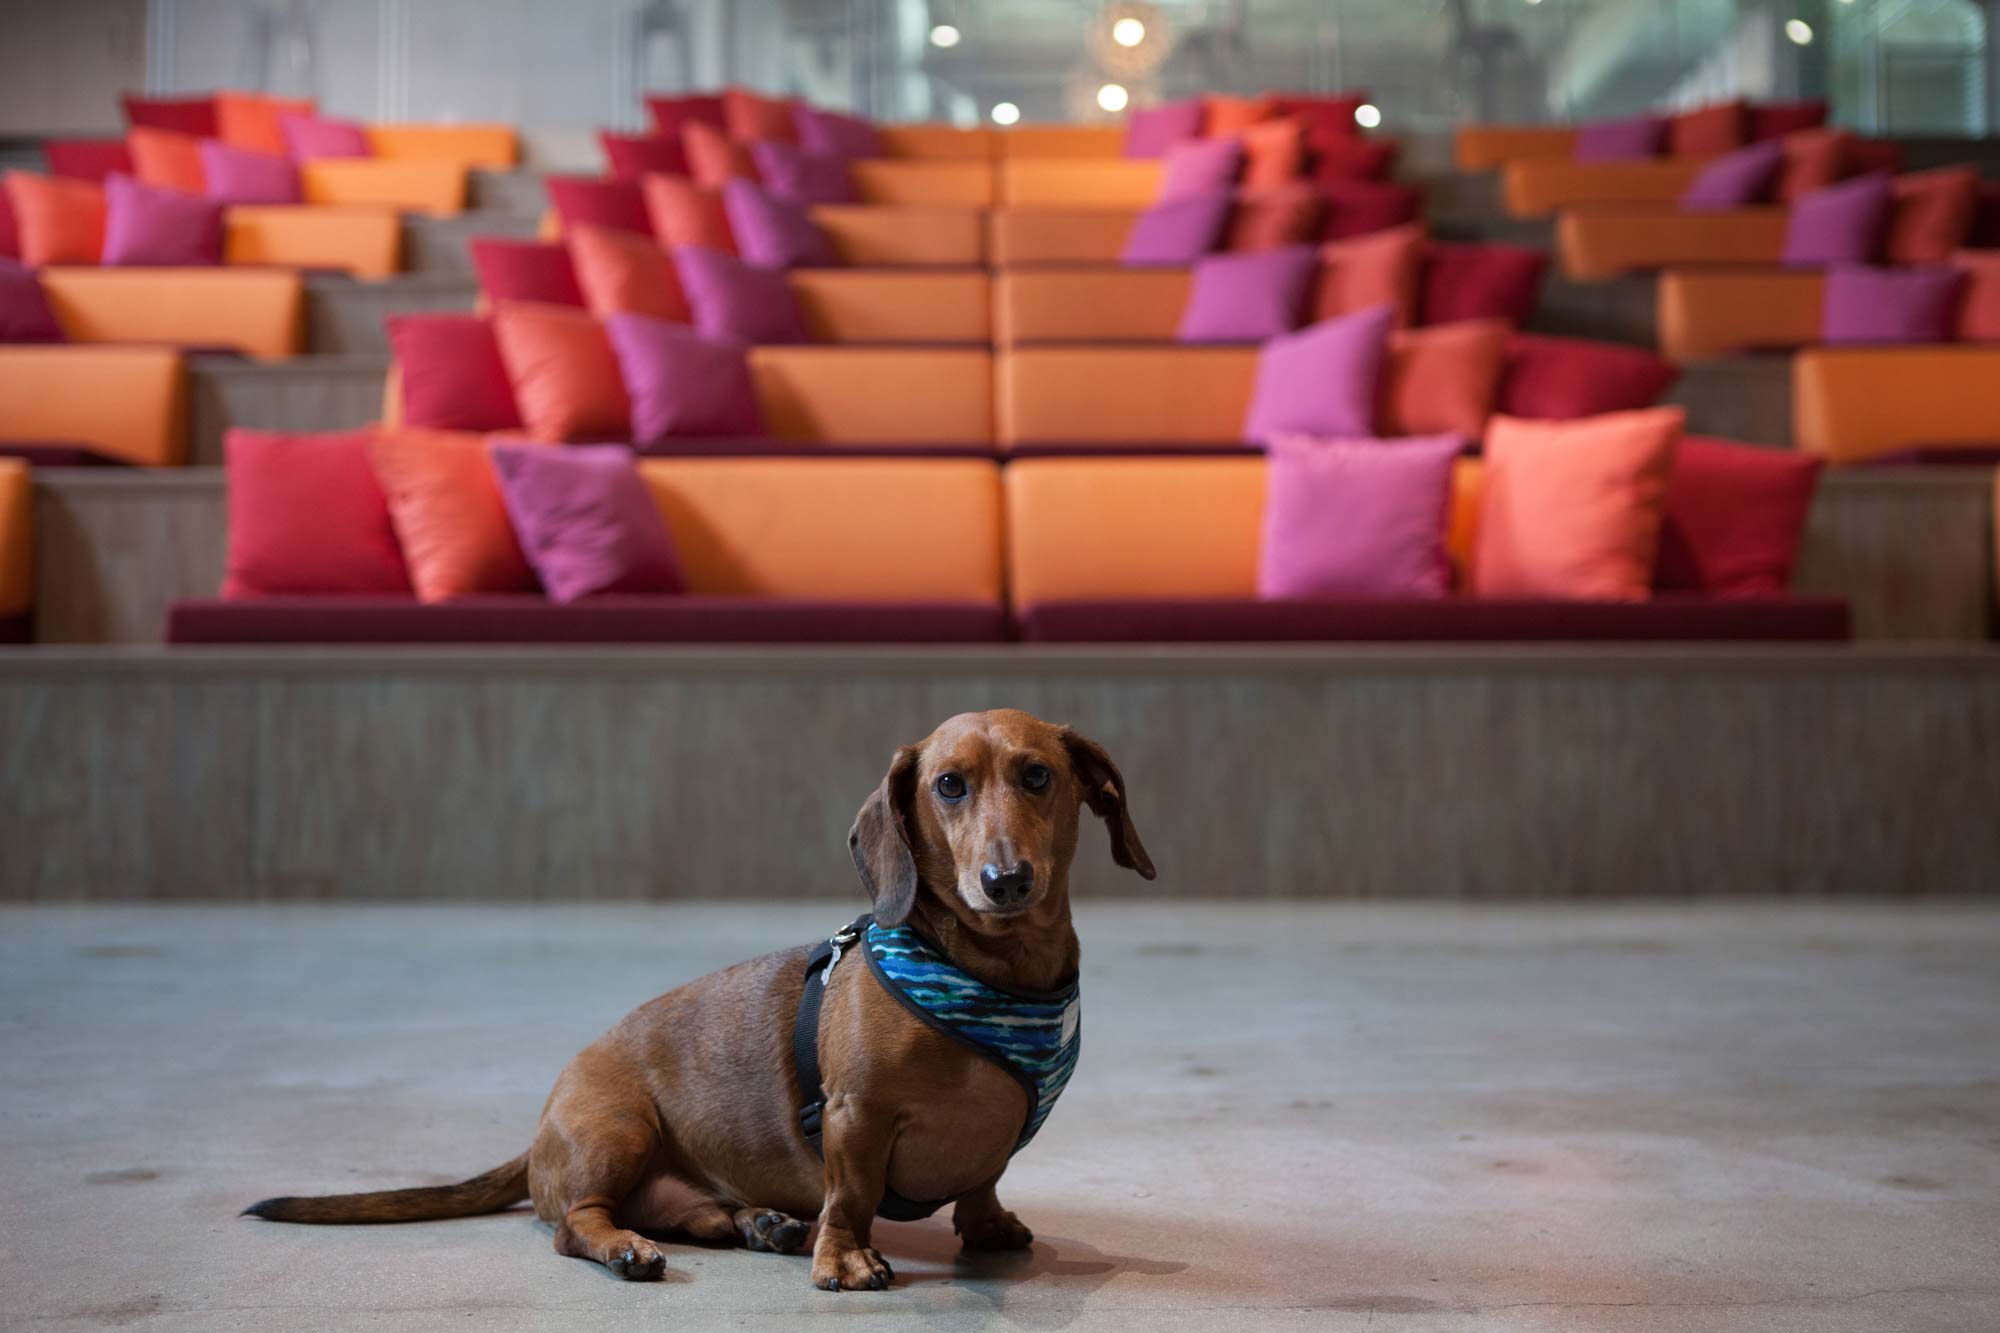 Dachshund in front of colorful benches on stone floor, symmetrical cute photo | Dog Photography | Dog Portrait